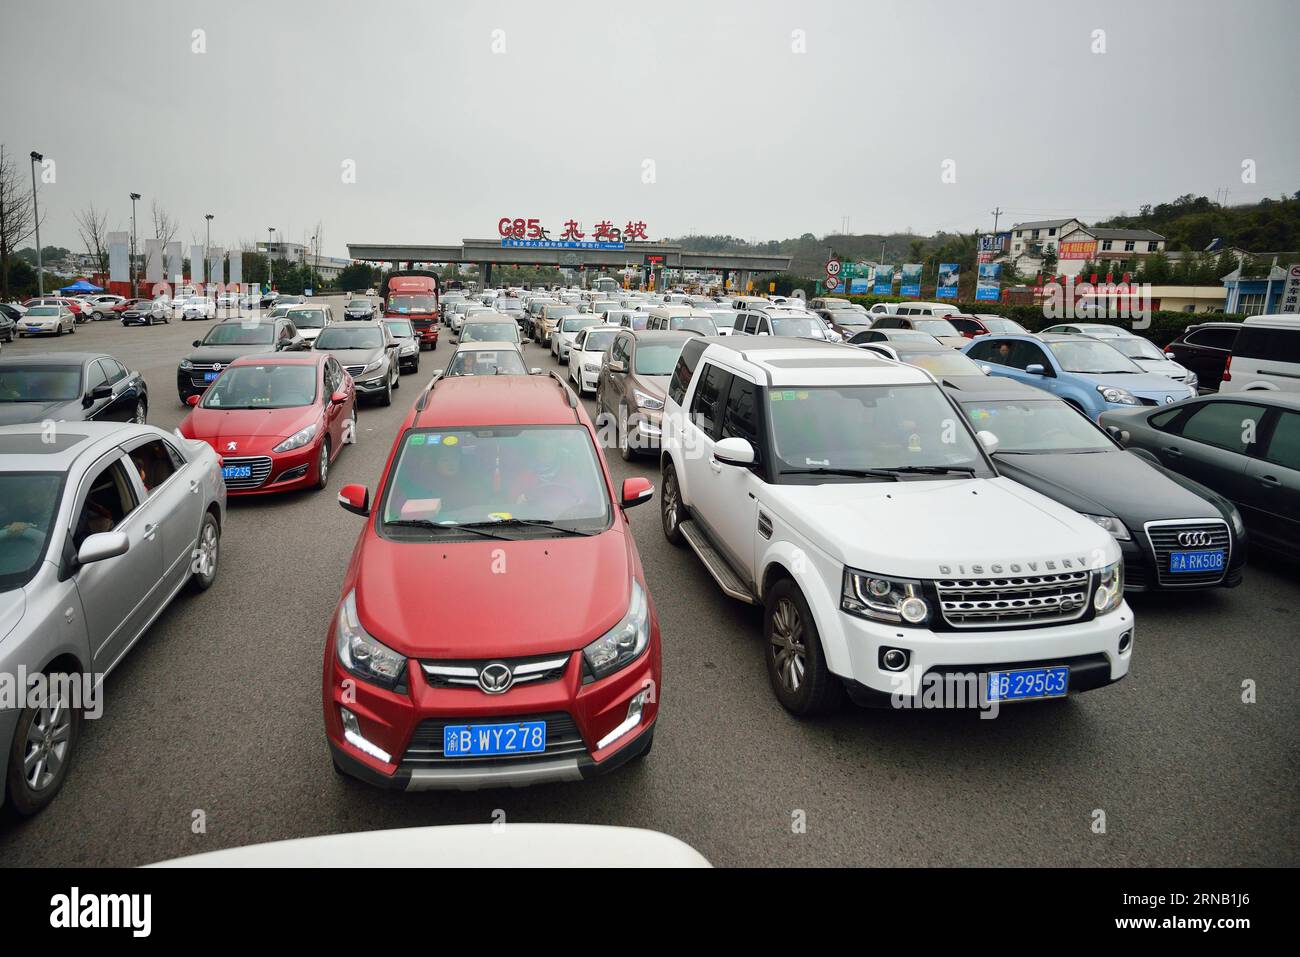 CHONGQING  Vehicles queue to pass the Jiulongpo Toll Station on the Chongqing-Kunming Highway in Chongqing, southwest China, Feb. 13, 2016. Chinese passengers made a record number of trips during the Spring Festival holiday, according to the Ministry of Transport (MOT) on Sunday. Passenger trips reached 400 million from Feb. 7 to 13, up 6.7 percent from last year, MOT data showed. Over 47 million trips were made by rail, more than 333 million on road and about 8.5 million by air. Road trips were up by 7 percent. ) (lfj) CHINA-SPRING FESTIVAL HOLIDAY-TRIPS (CN) ChenxXingyu PUBLICATIONxNOTxINxCH Stock Photo